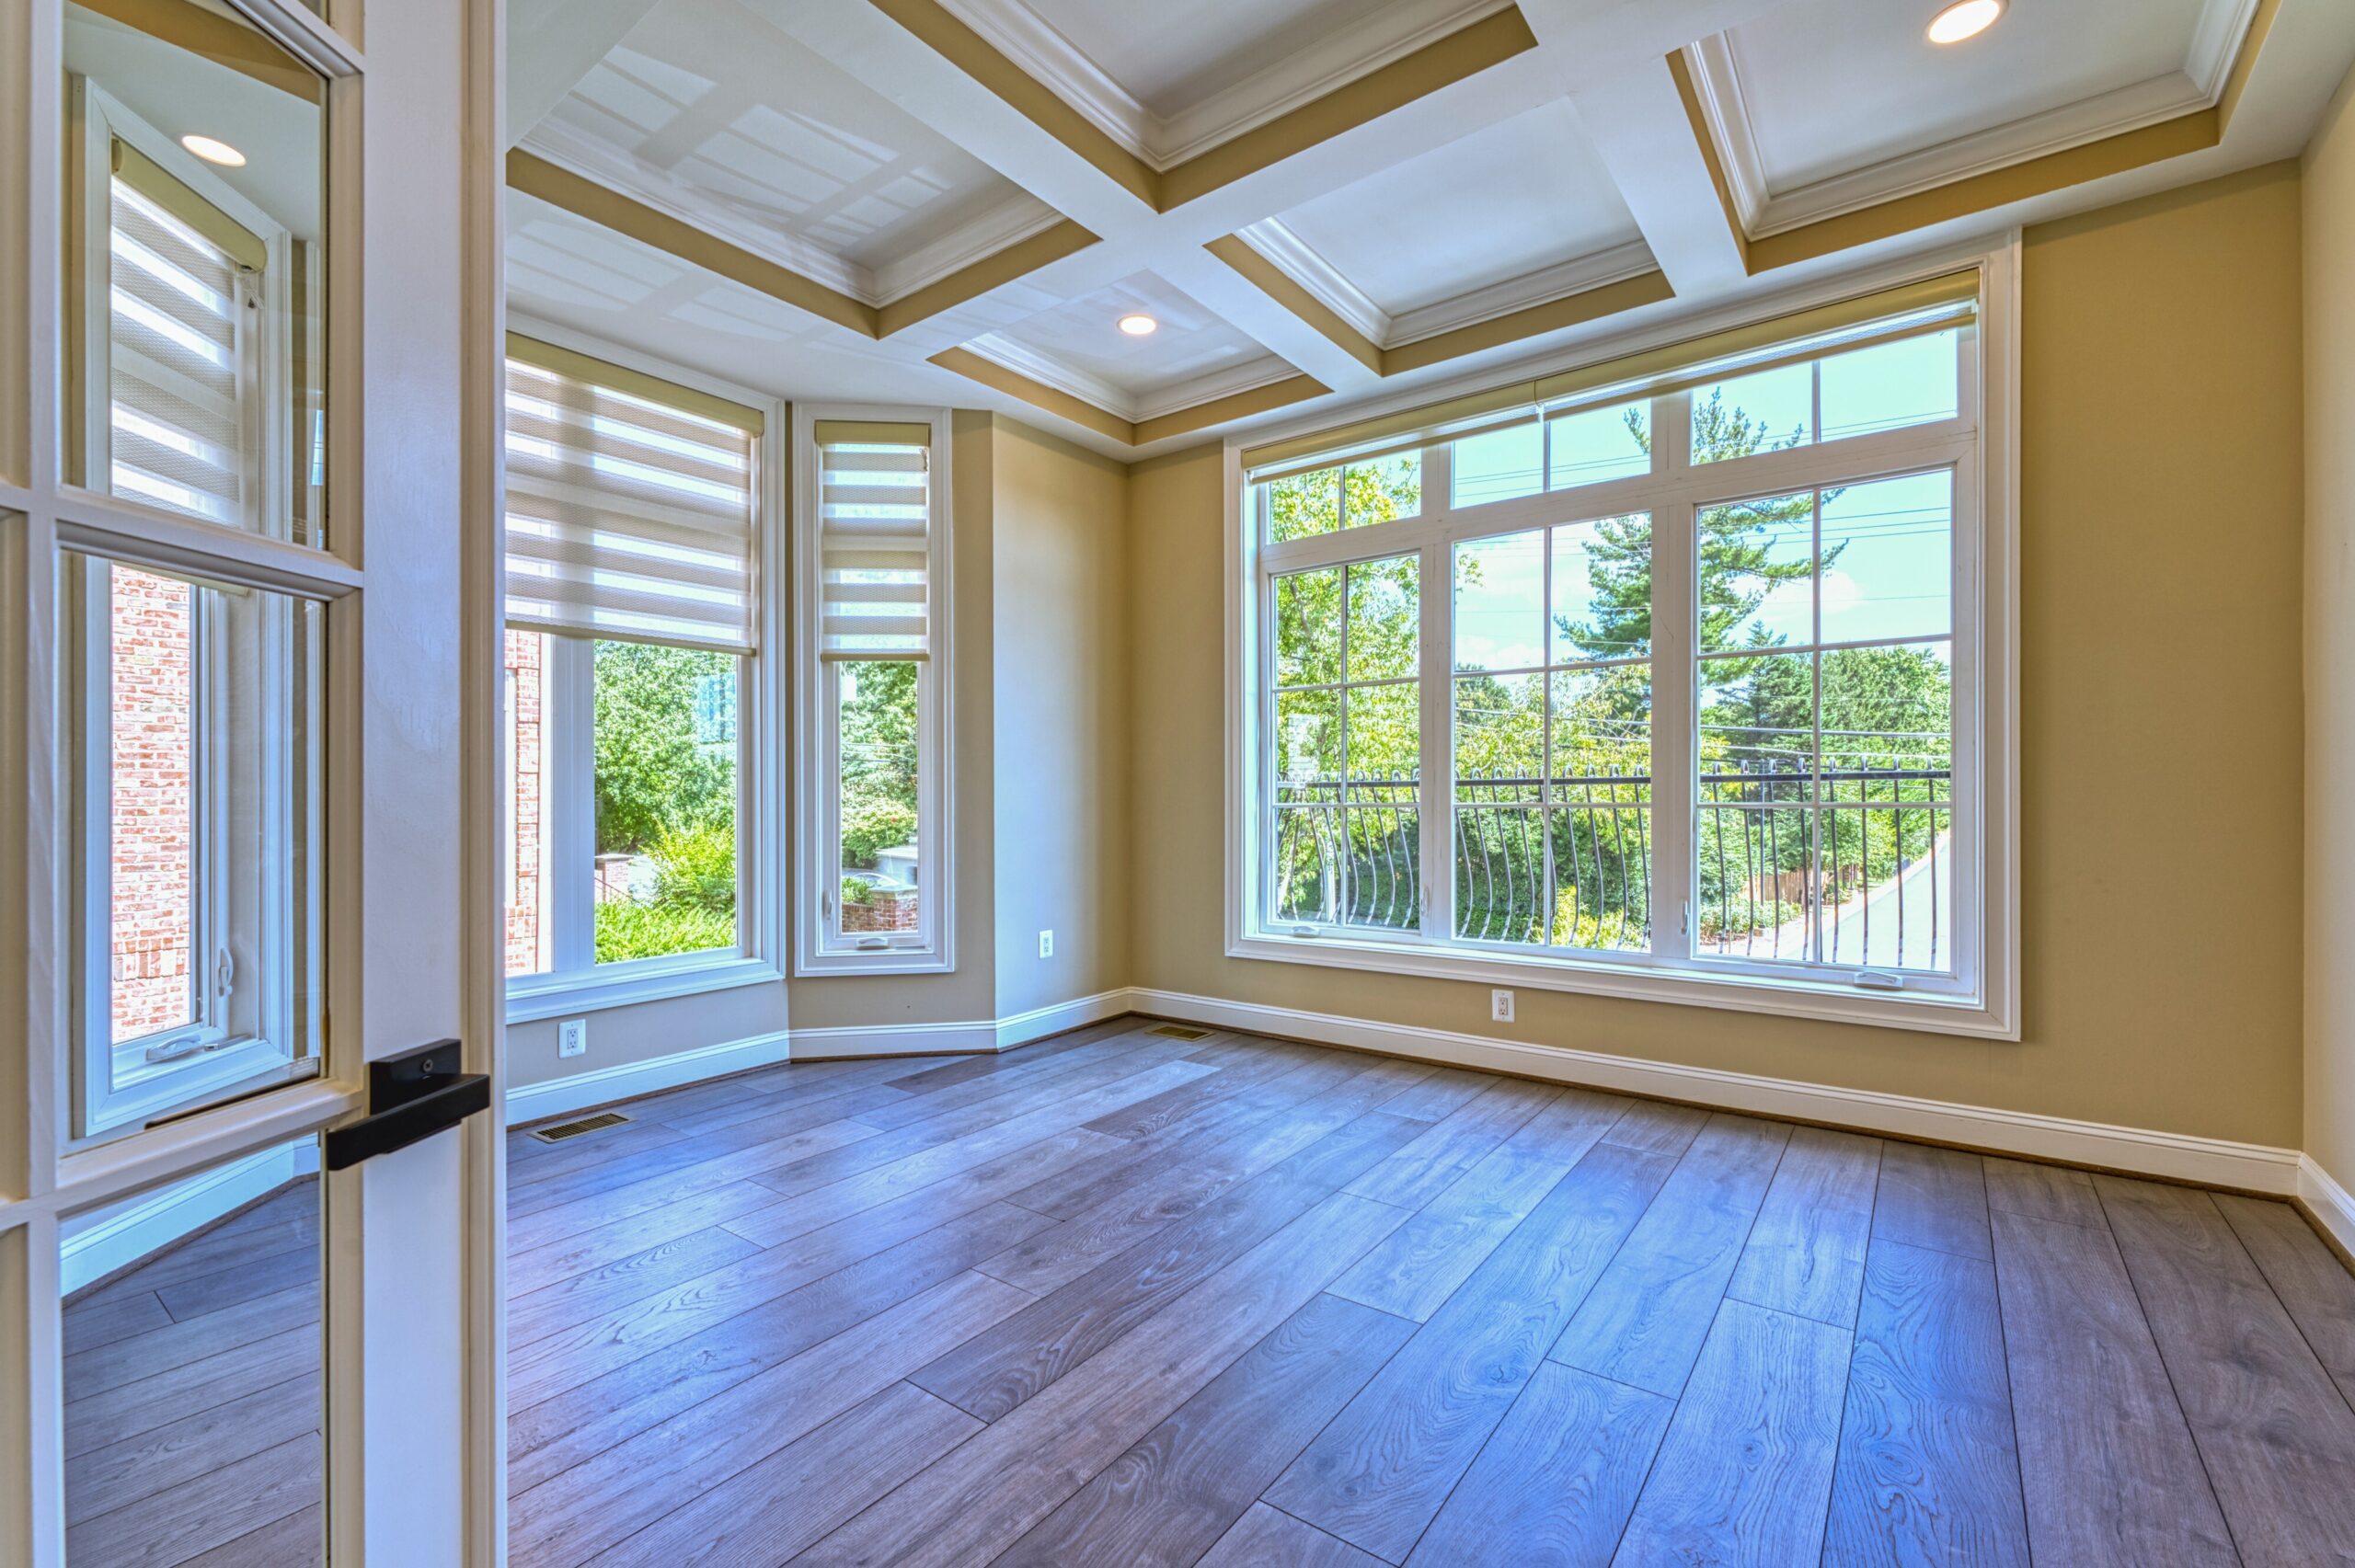 professional Fusion photo of the interior of a home in McLean, VA - showing sunroom/formal sitting room (empty) with deep coffered ceiling